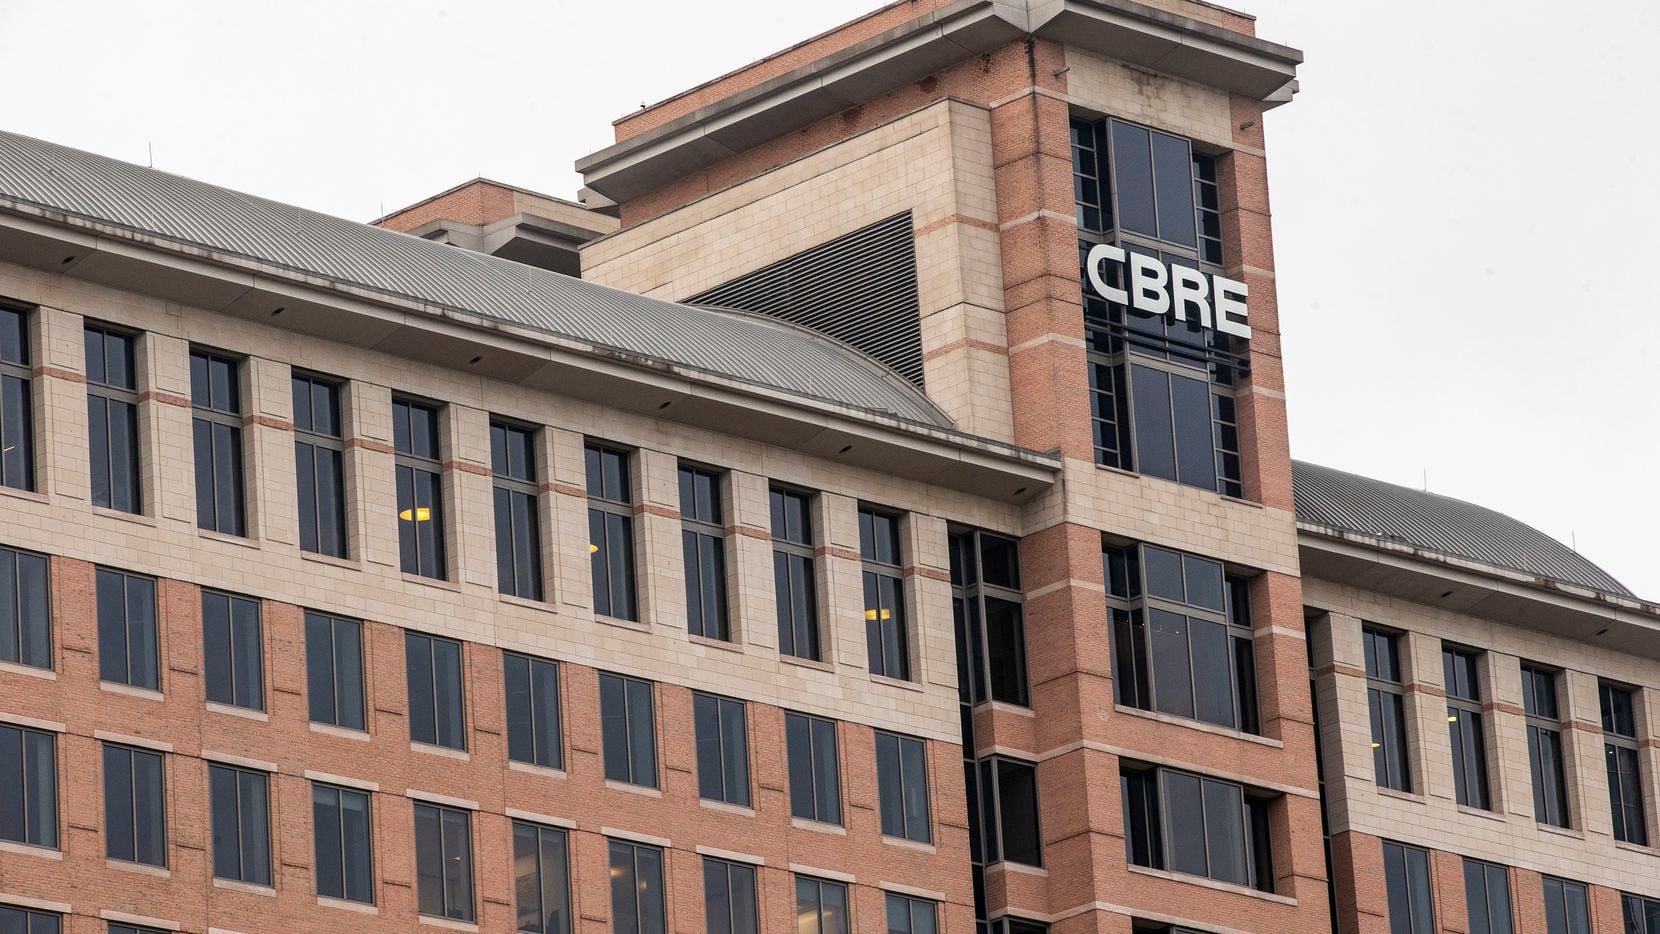 CBRE, which owns Dallas-based developer Trammell Crow Co., had a record $11.5 billion in its...